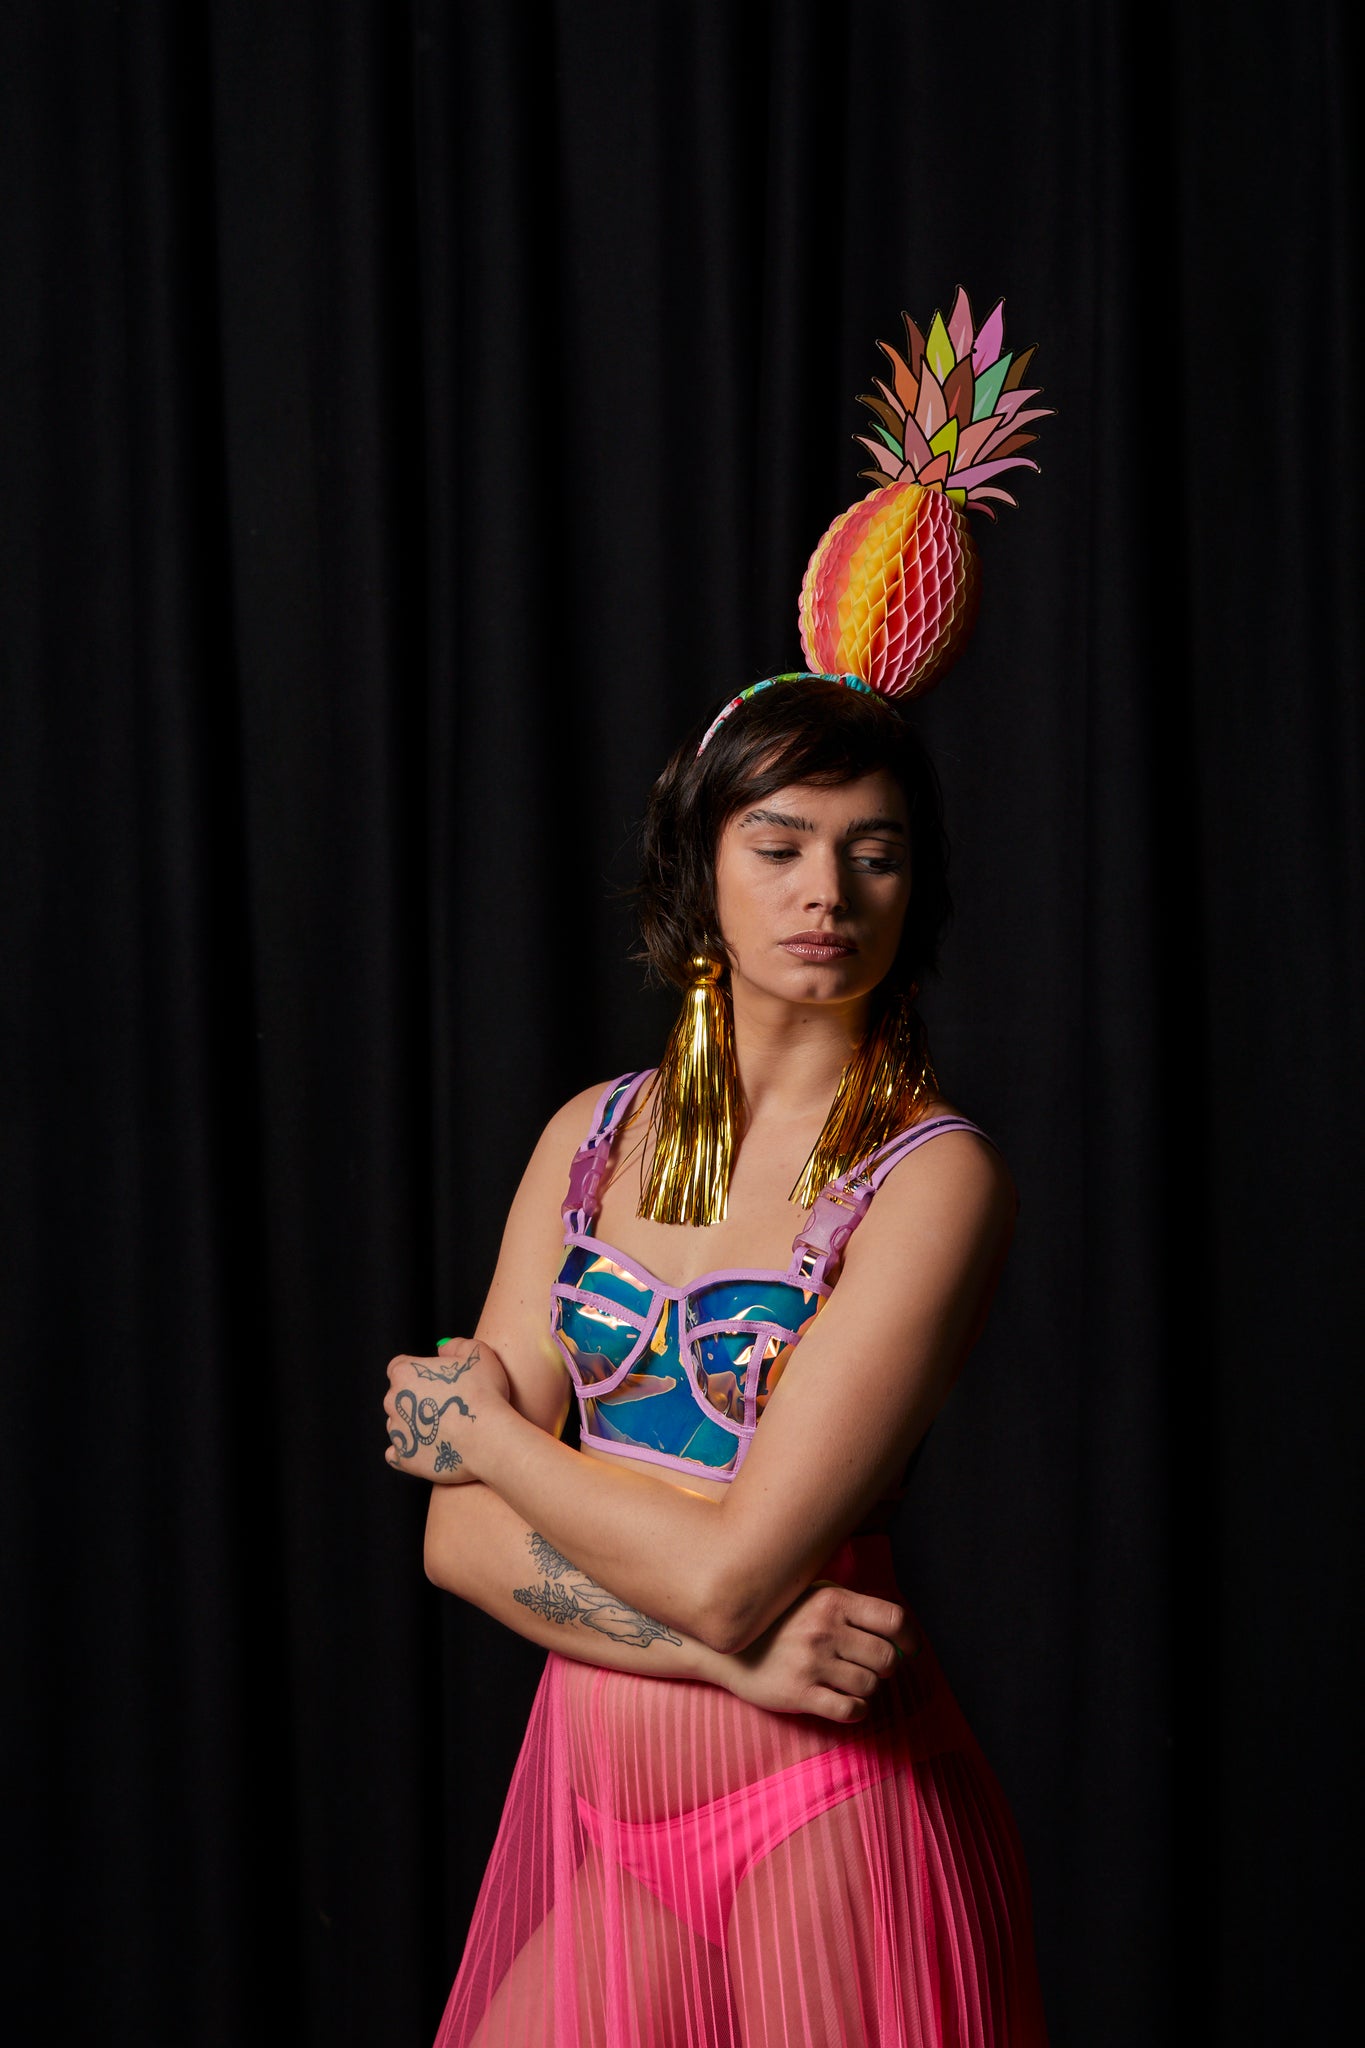 Ciara Monahan - Pink Fold Away Psychedelic Pineapple Headpiece with Gold Tassels